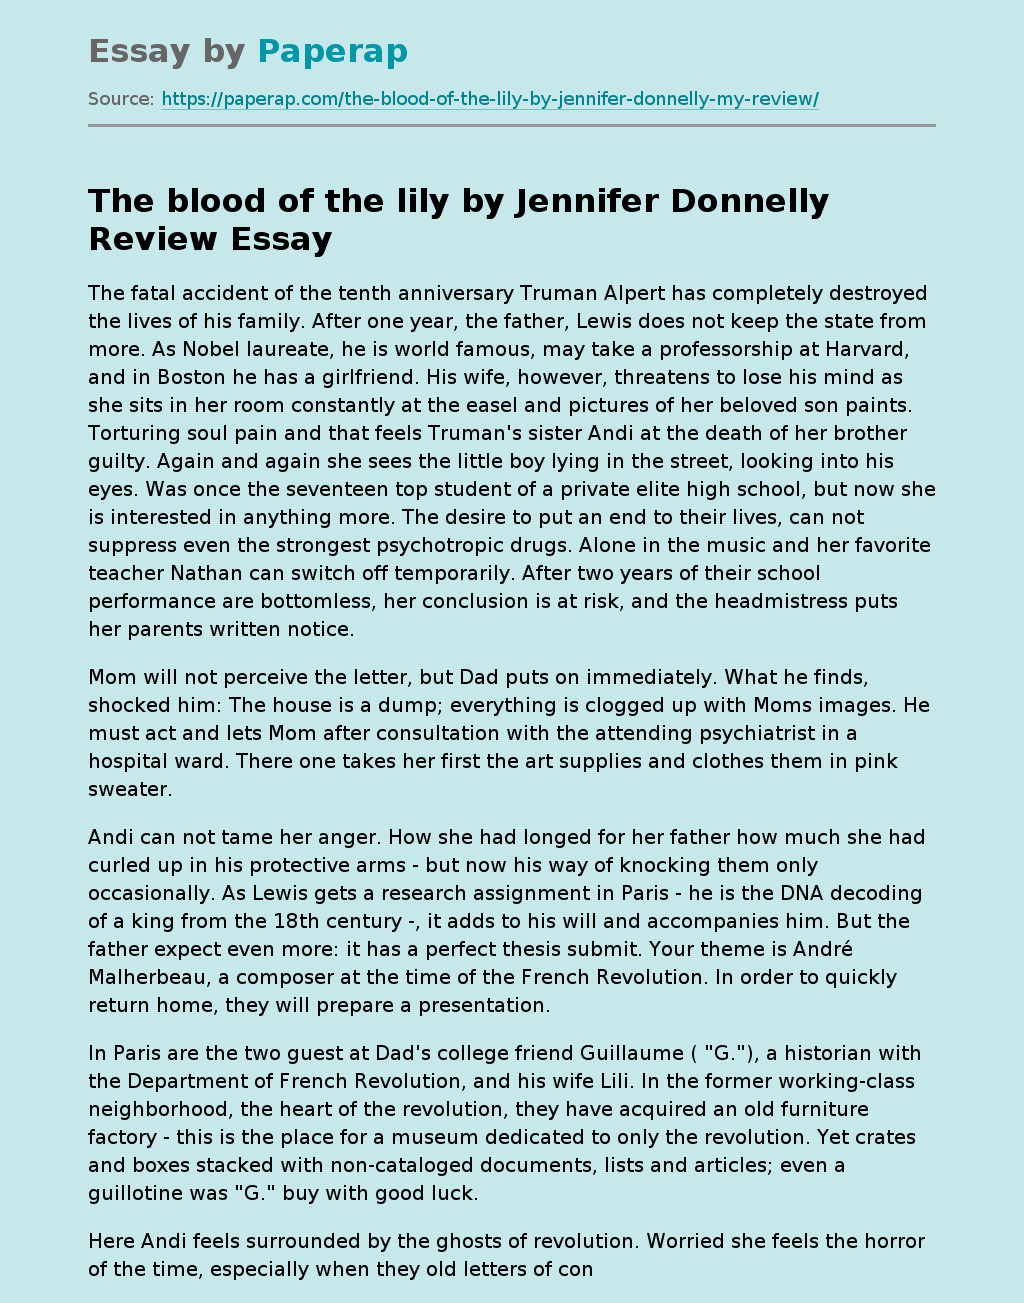 The blood of the lily by Jennifer Donnelly Review